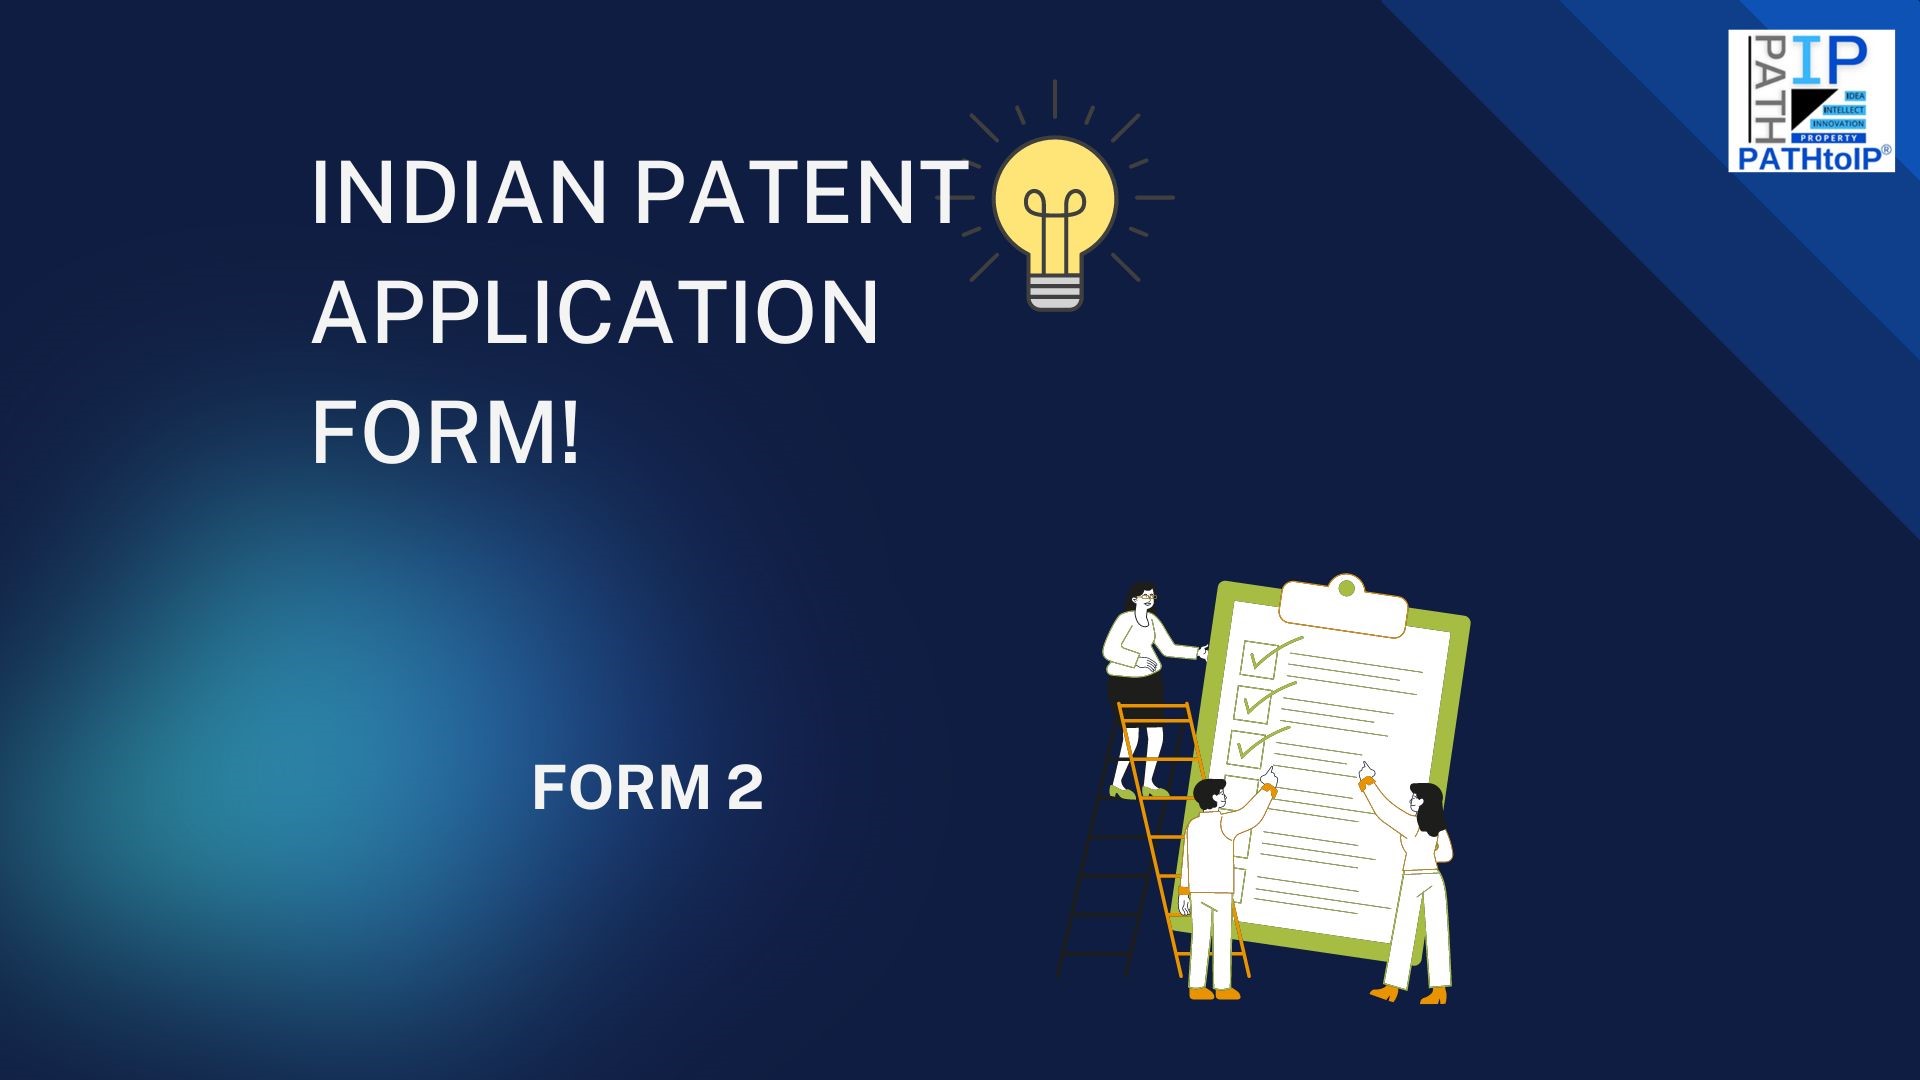 Indian Patent Forms: FORM 2